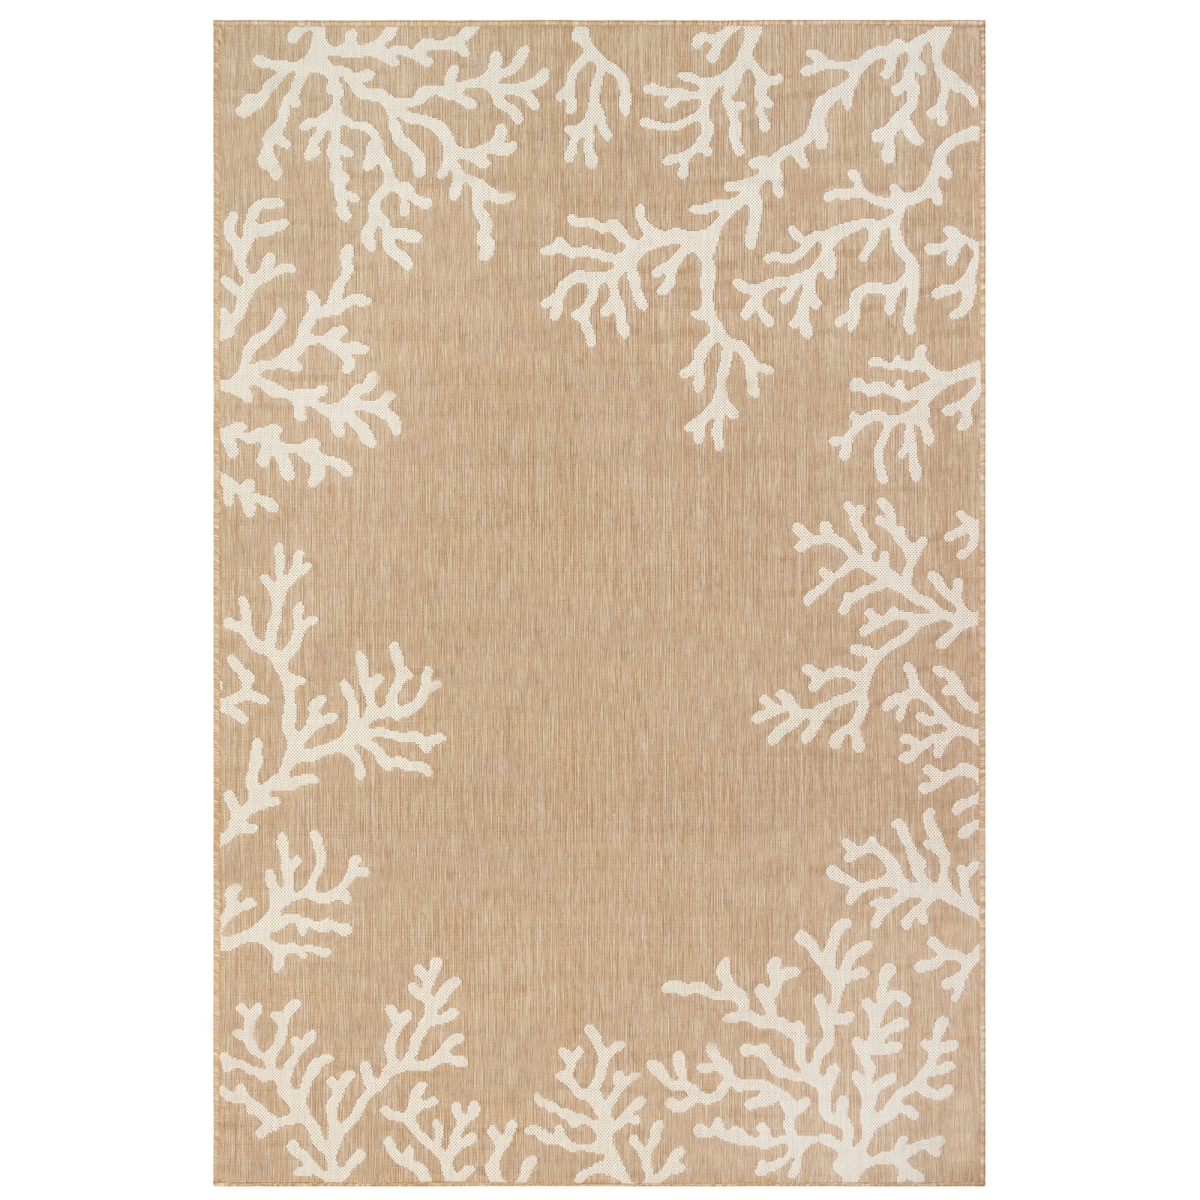 Cre80844812 Liora Manne Carmel Coral Border Indoor & Outdoor Rug, Sand - 7 Ft. 10 In. X 9 Ft. 10 In.